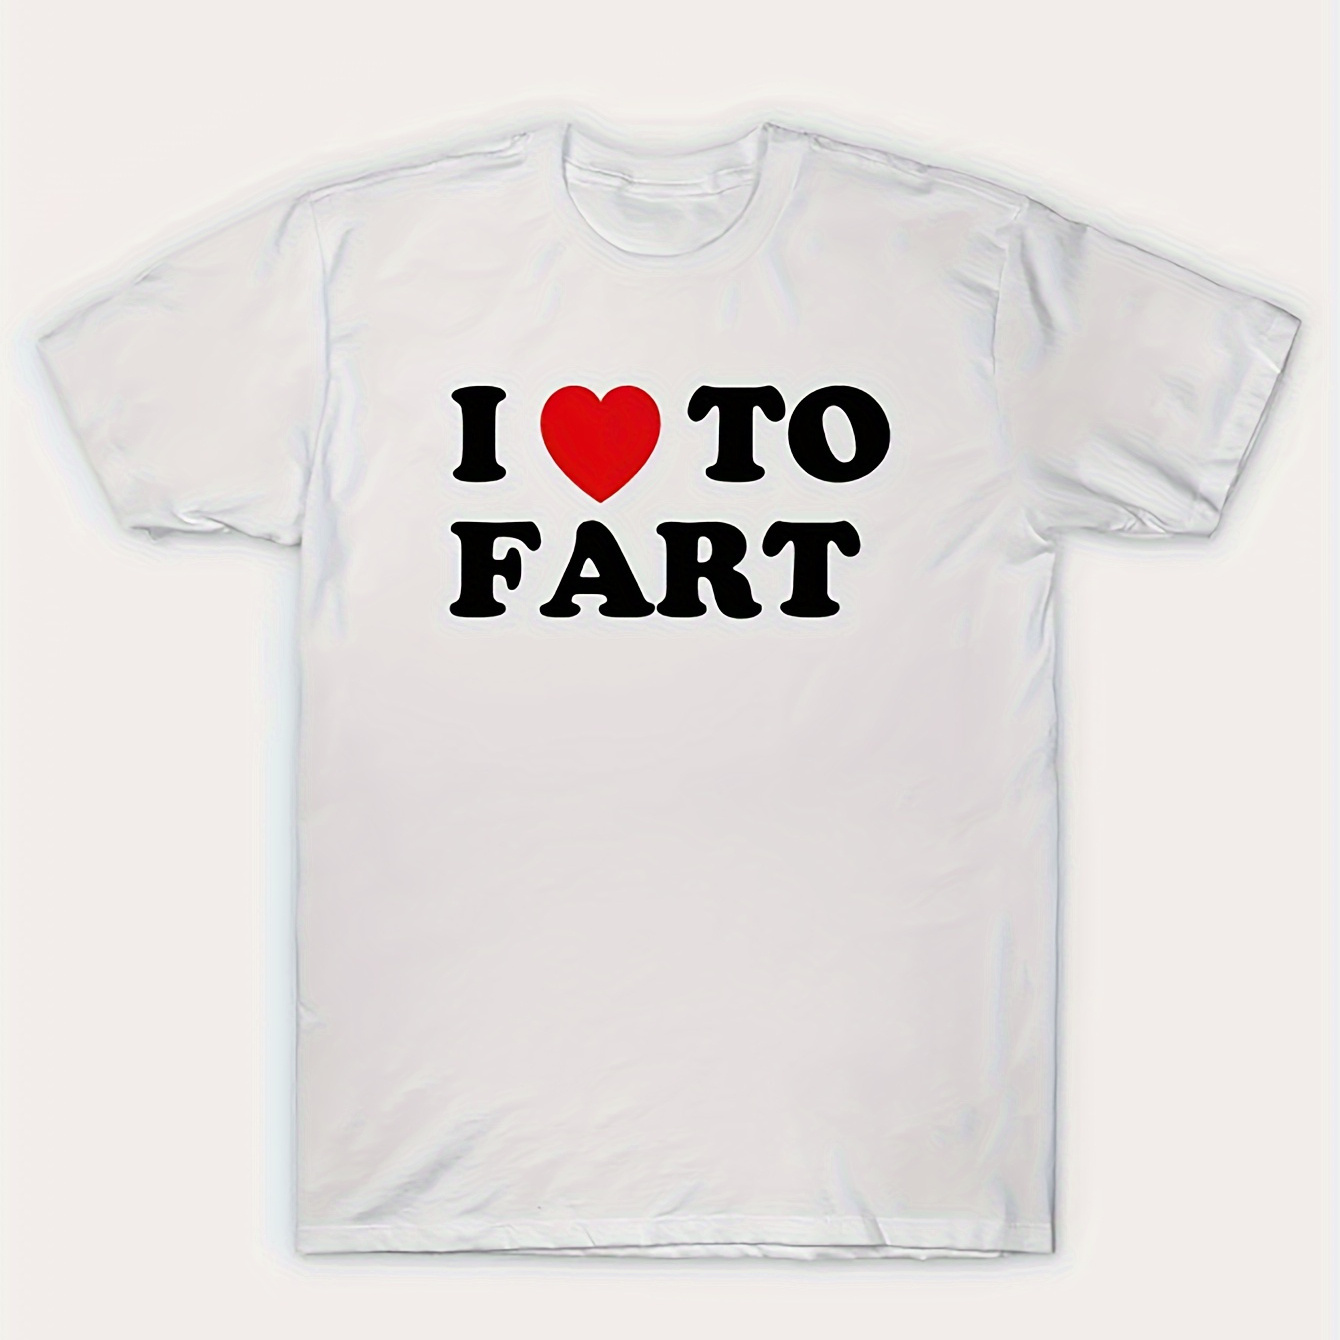 

1 Pc, 100% Cotton T-shirt, Unisex I Love To Fart Humorous T-shirt - Bold Witty Print, Comfortable Cotton Blend, Available In Sizes S-xxl